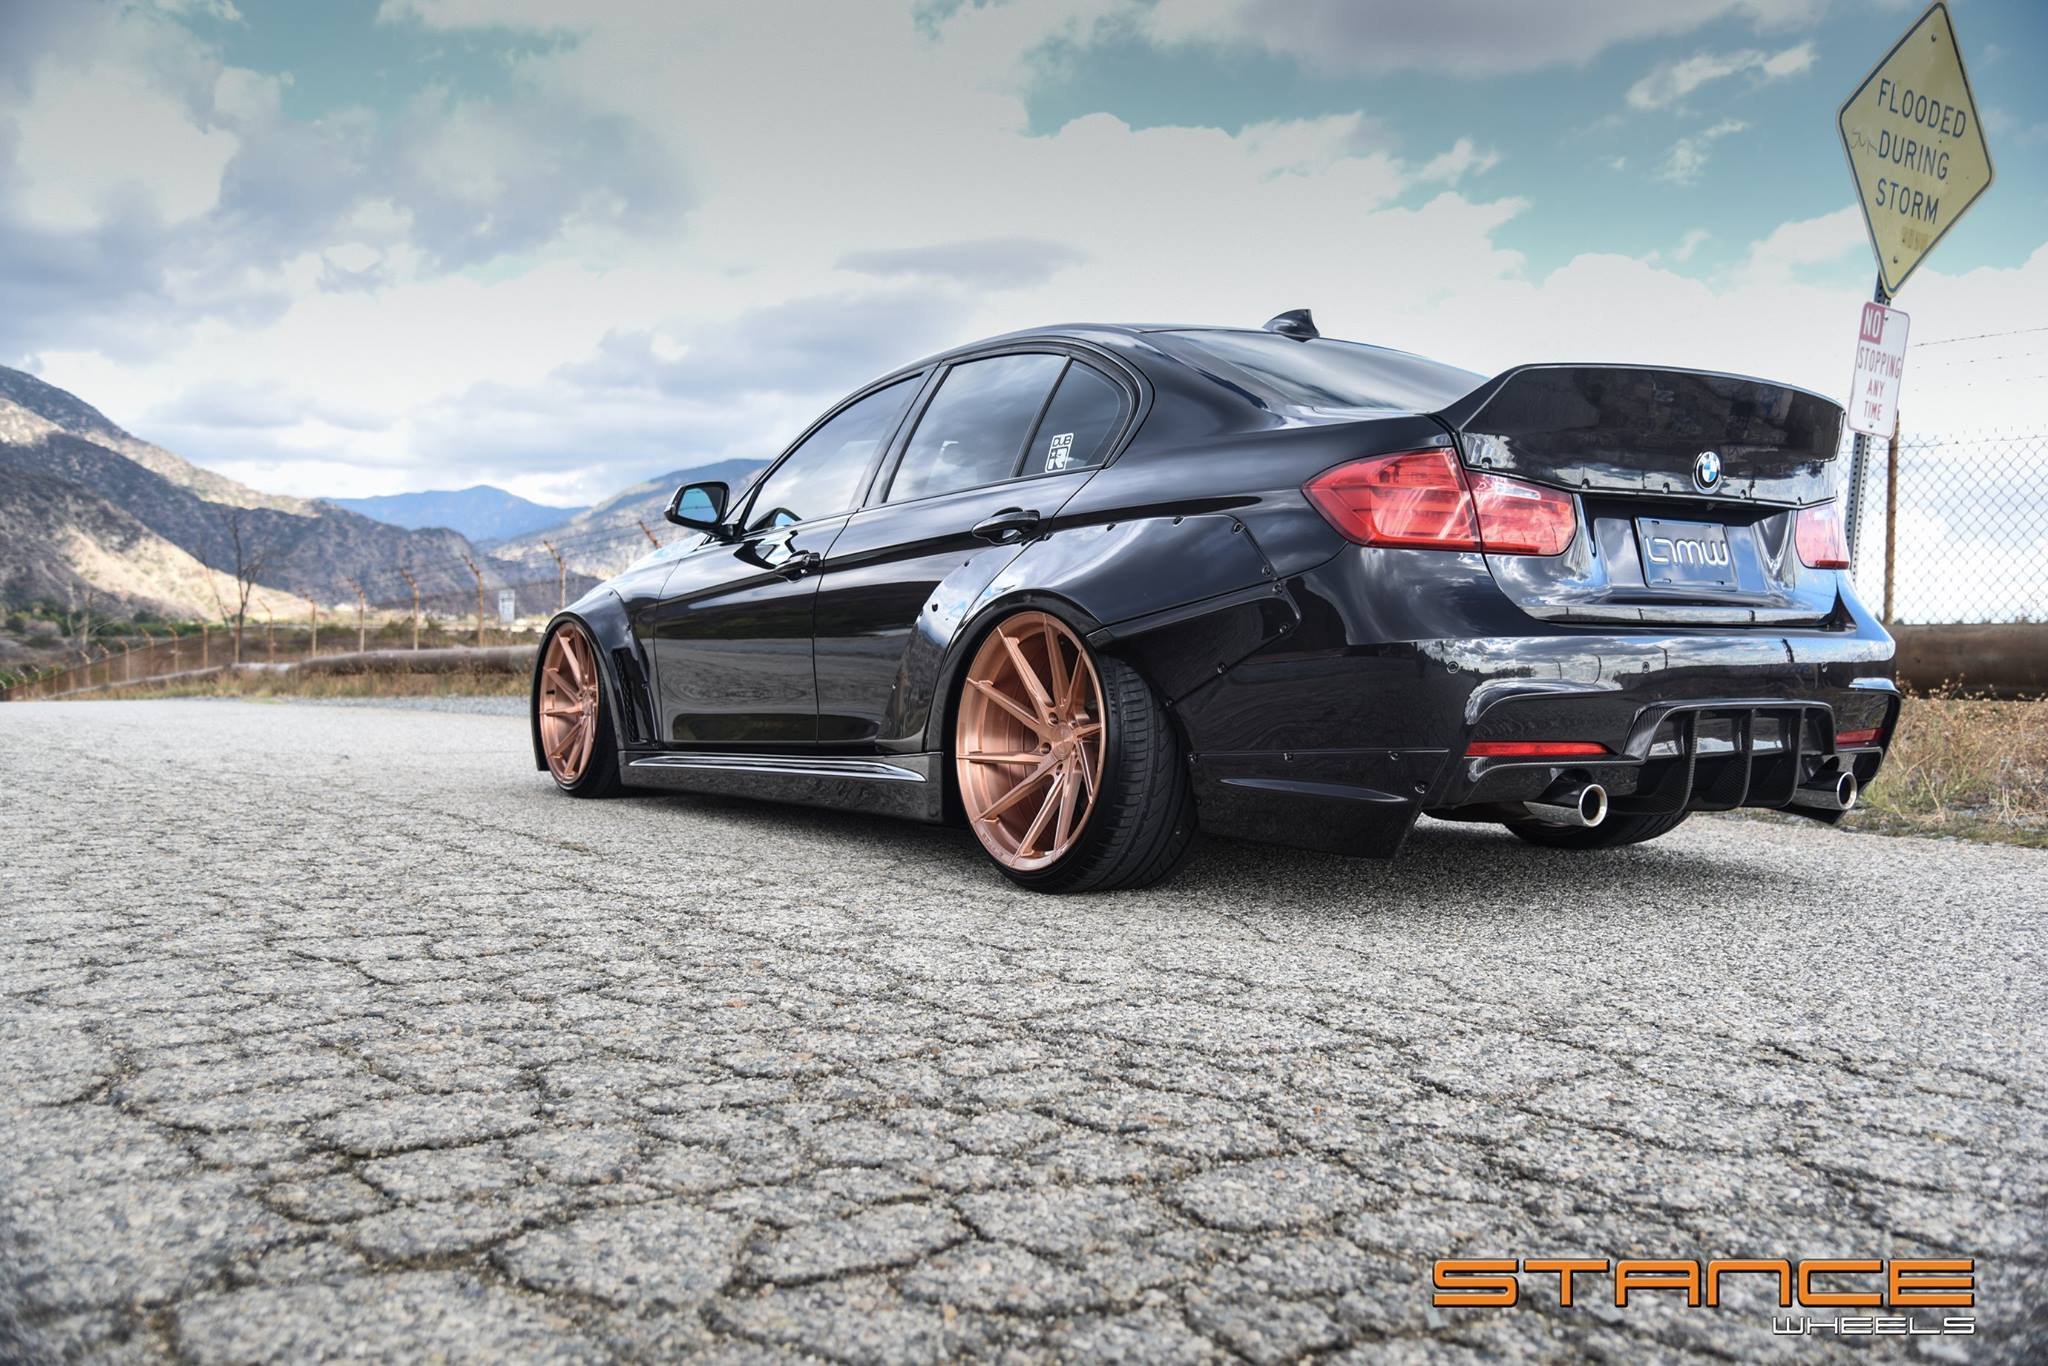 Custom Bronze Wheels on Black Stanced BMW 3-Series - Photo by Clinched